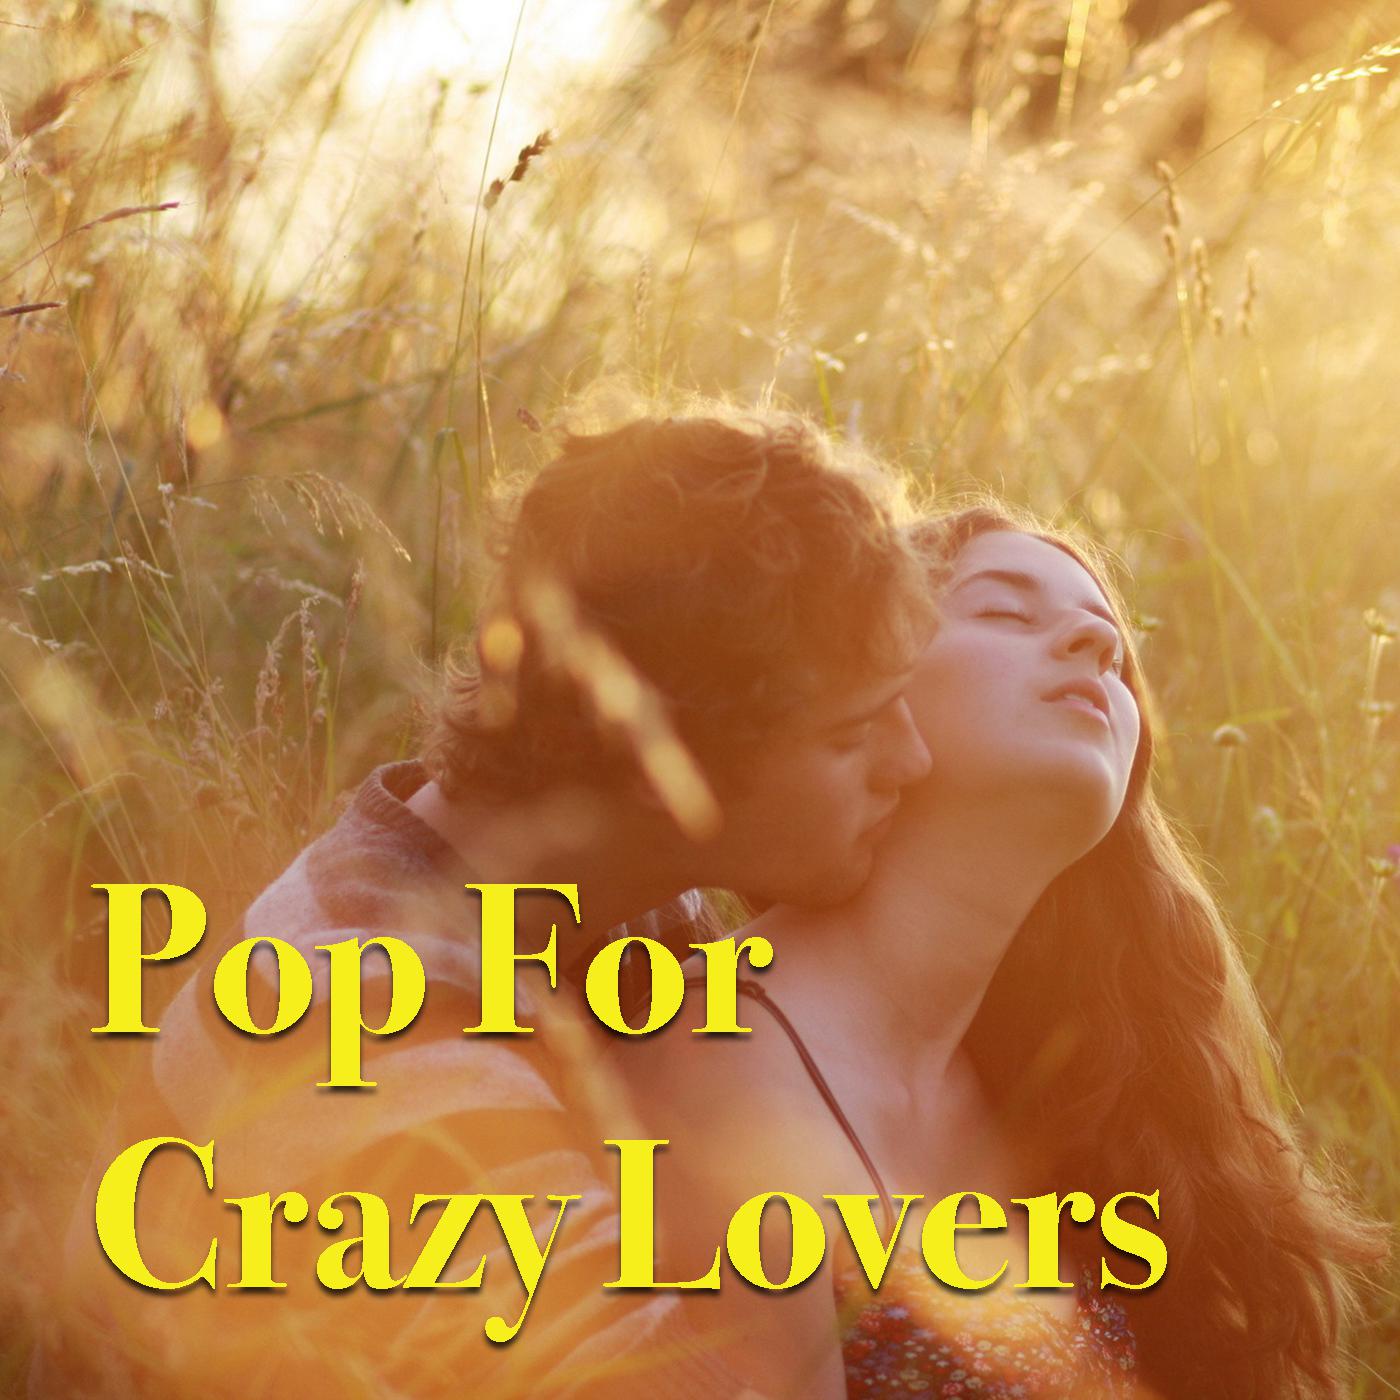 Pop For Crazy Lovers